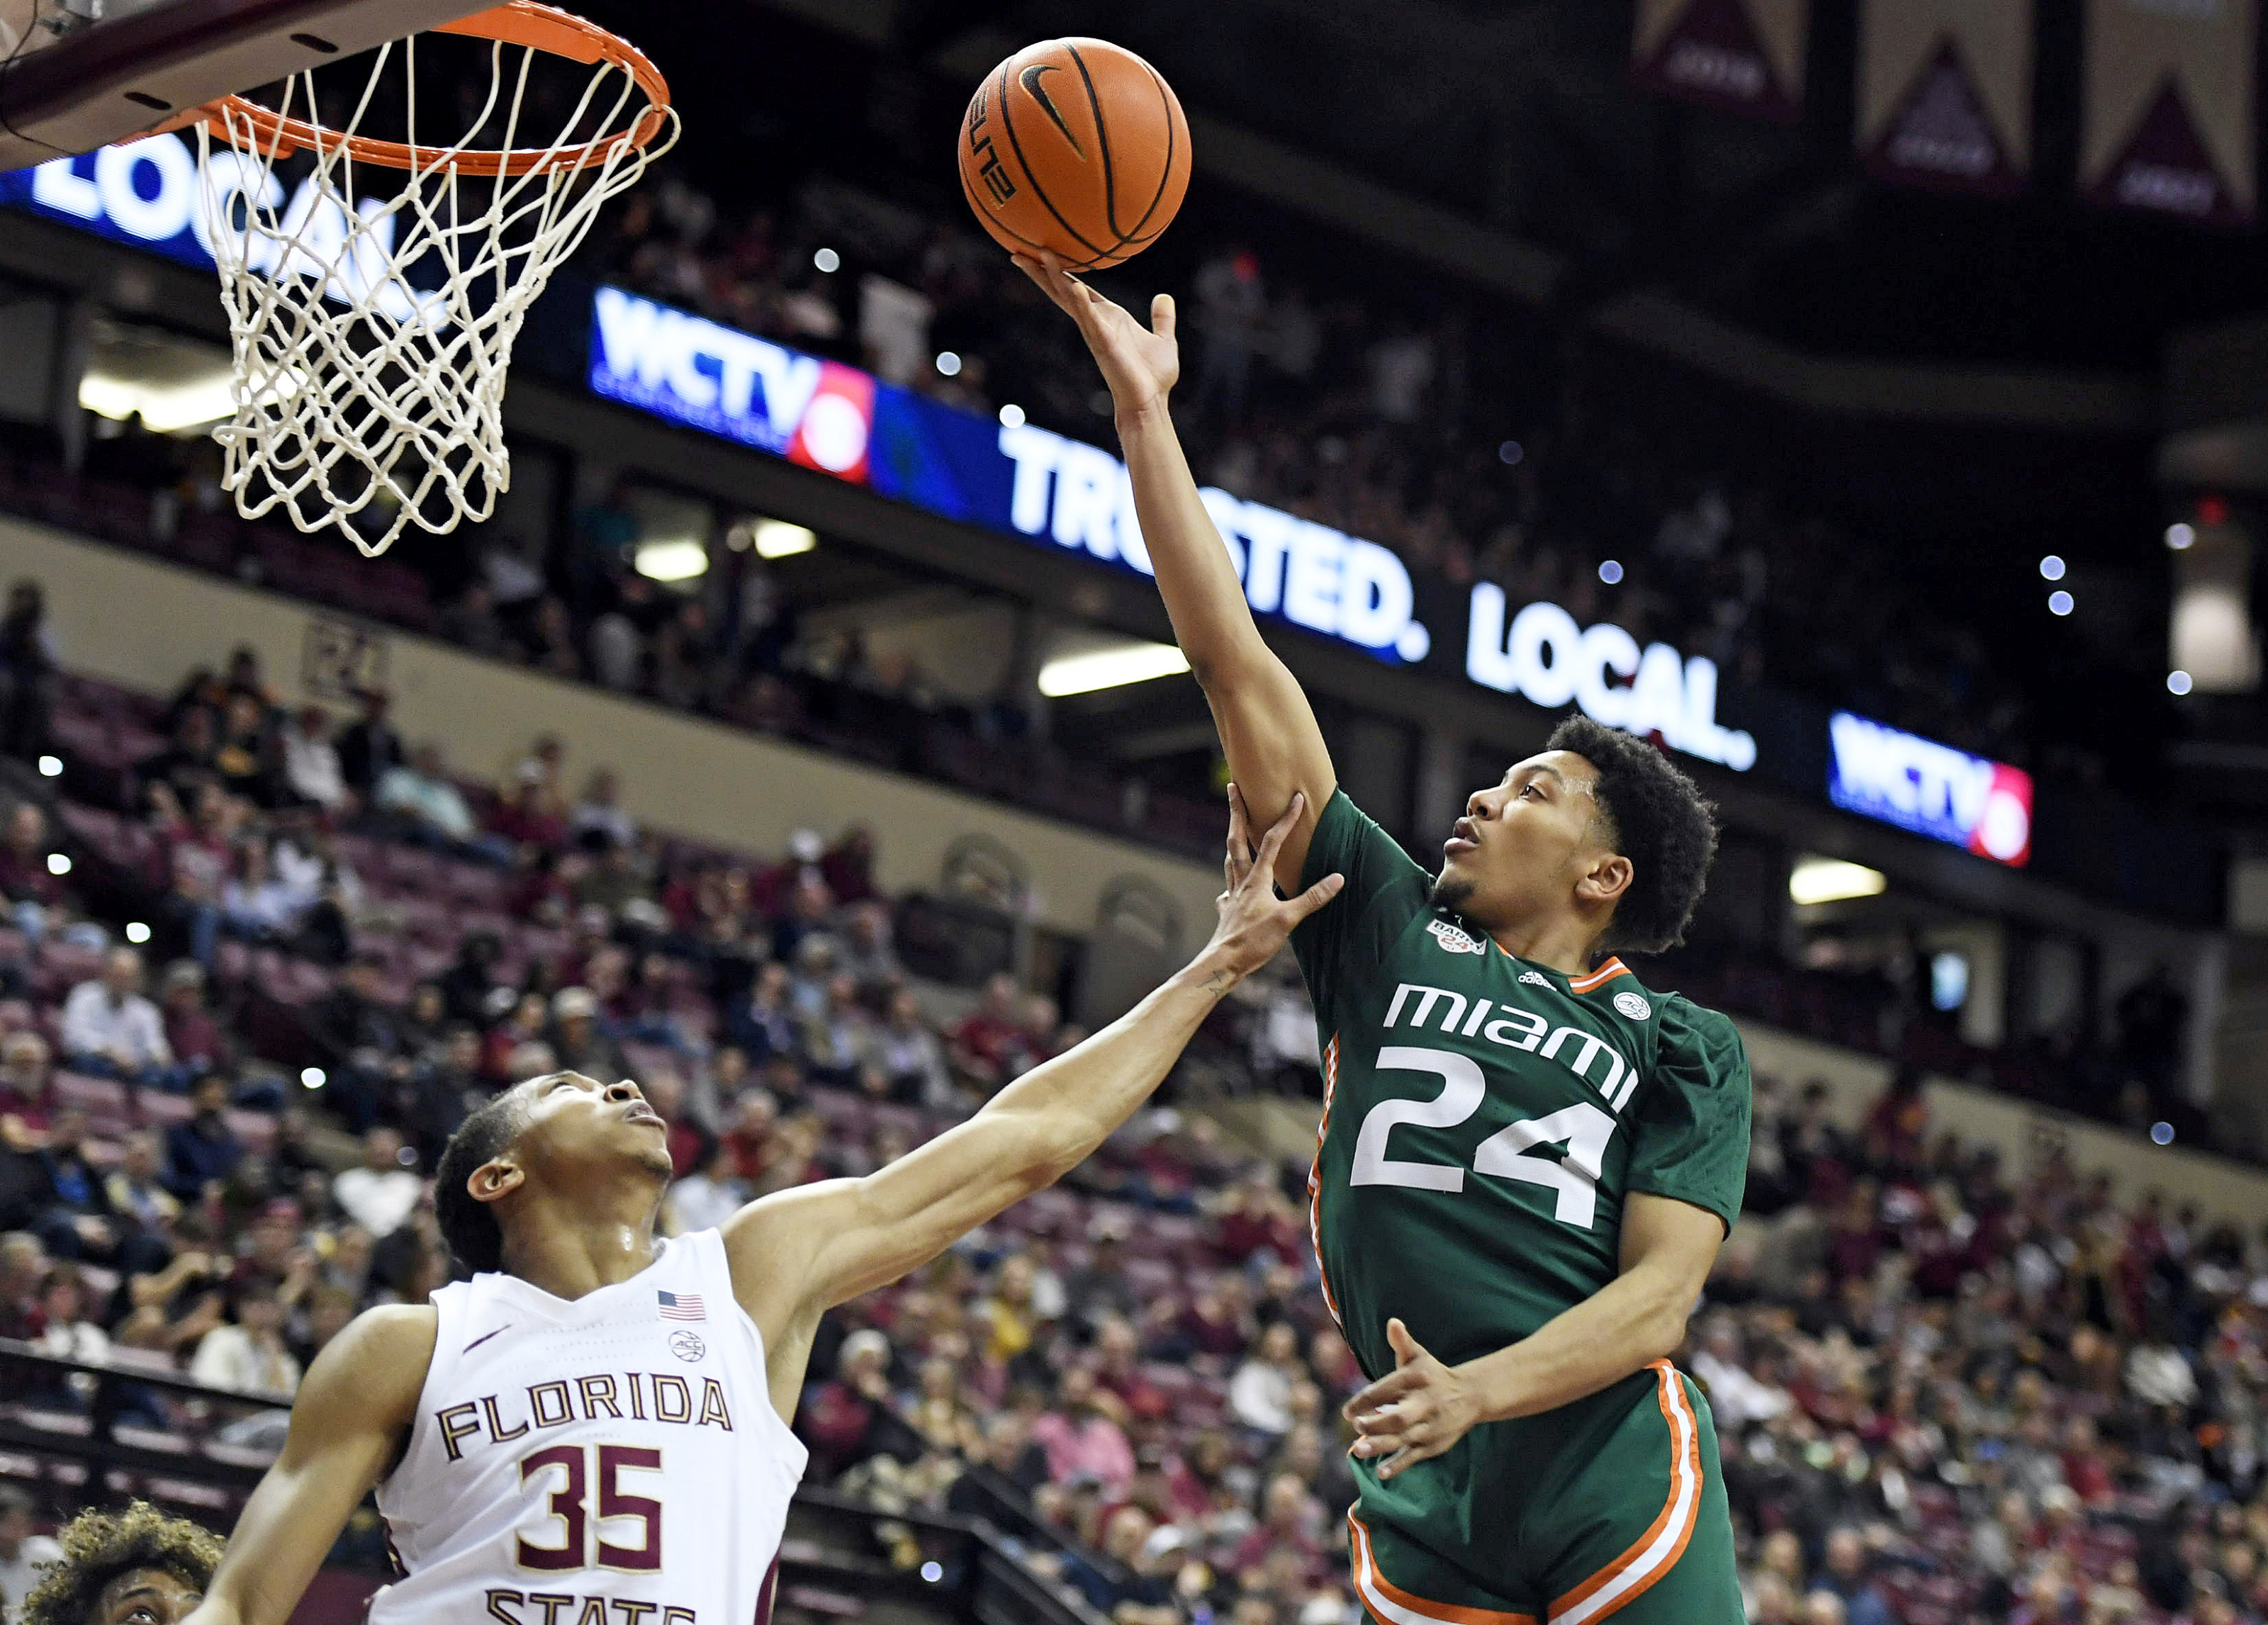 Florida State at Miami Basketball Game 29 info, live stream, odds, TV